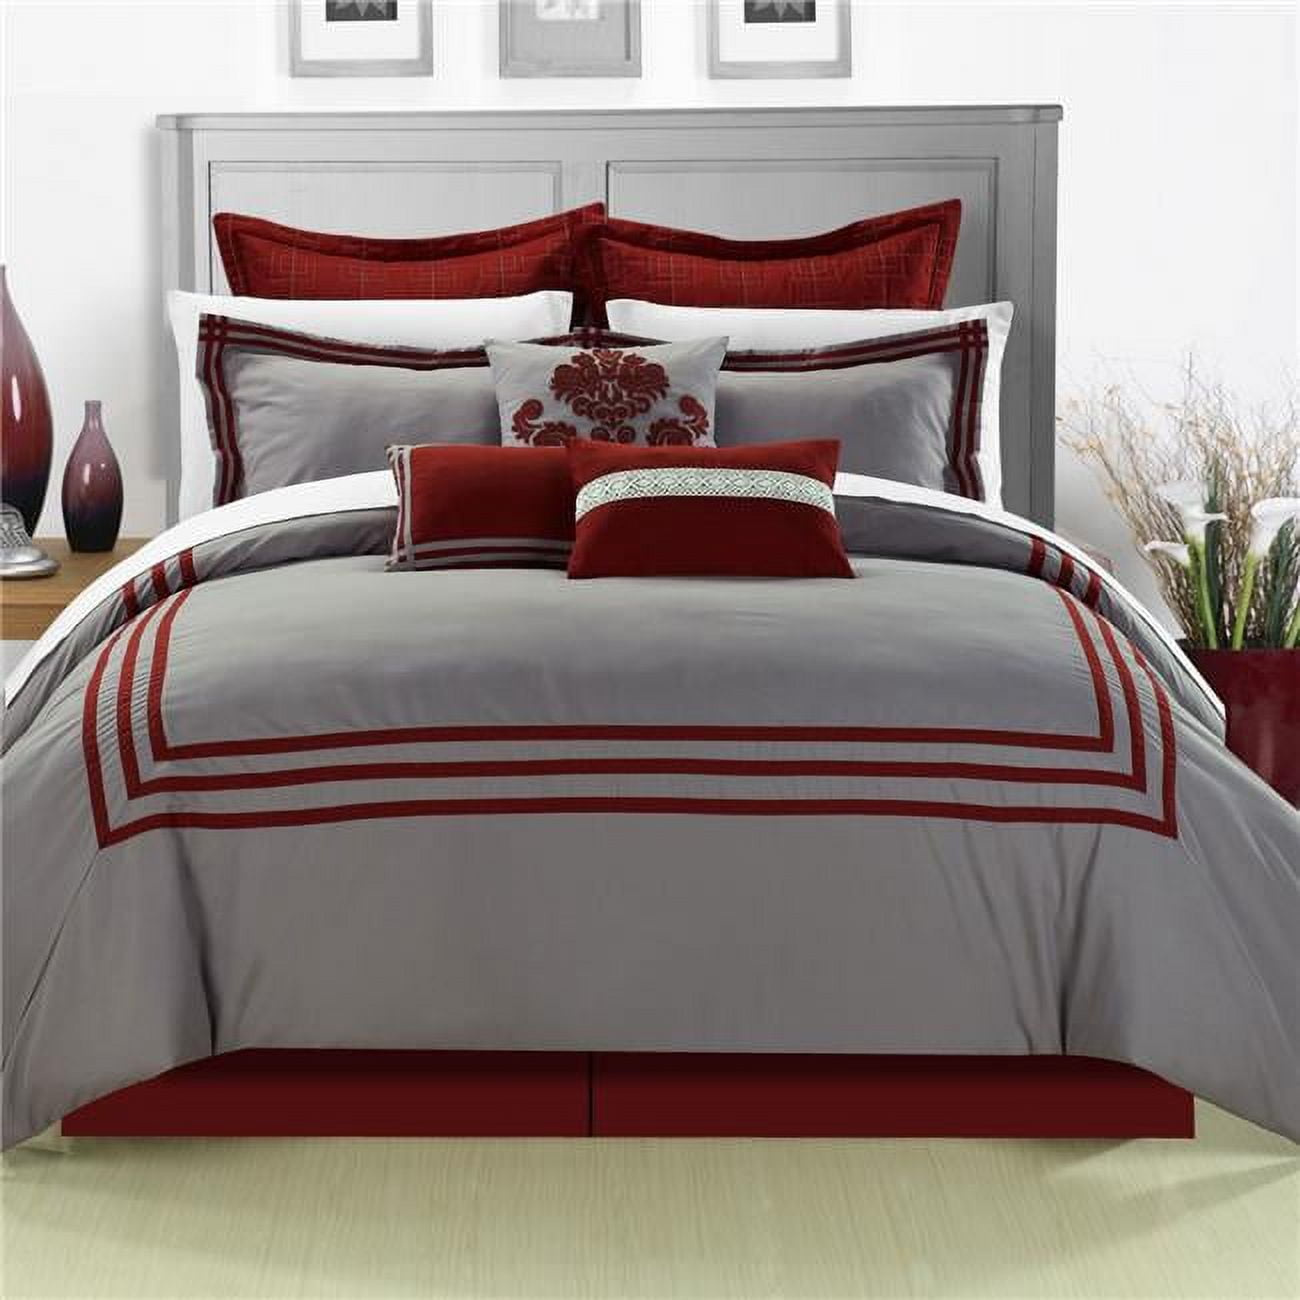 126cq111-us Cosmo Embroidered Comforter Set - Red - Queen - 8 Piece